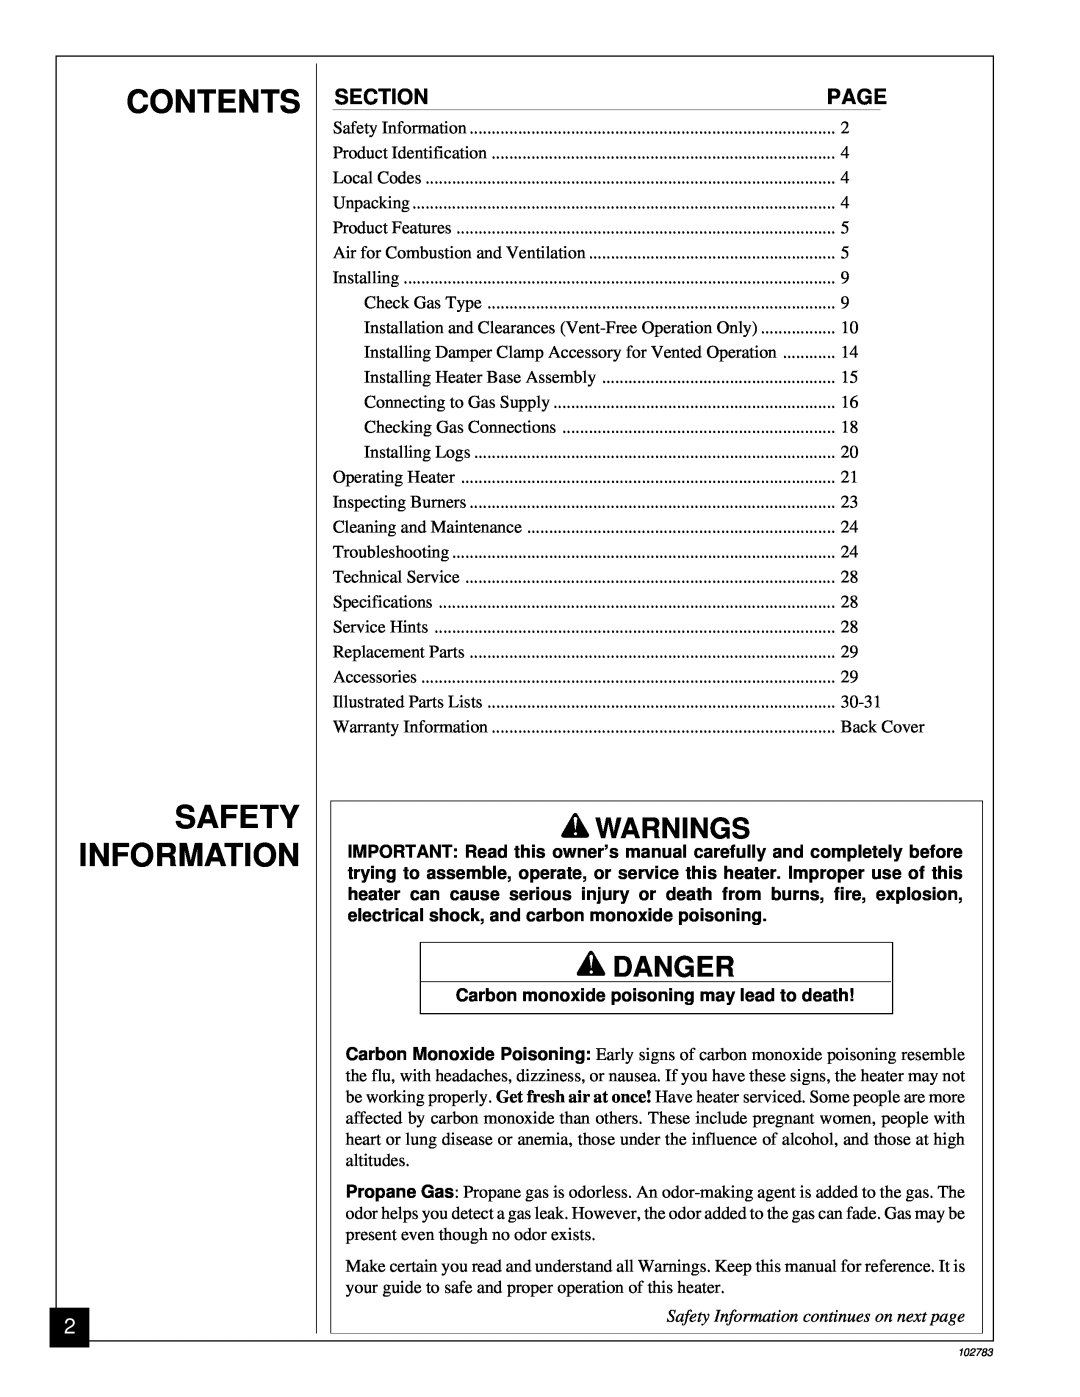 Desa 102783-01B Contents Safety Information, Warnings, Danger, Safety Information continues on next page 